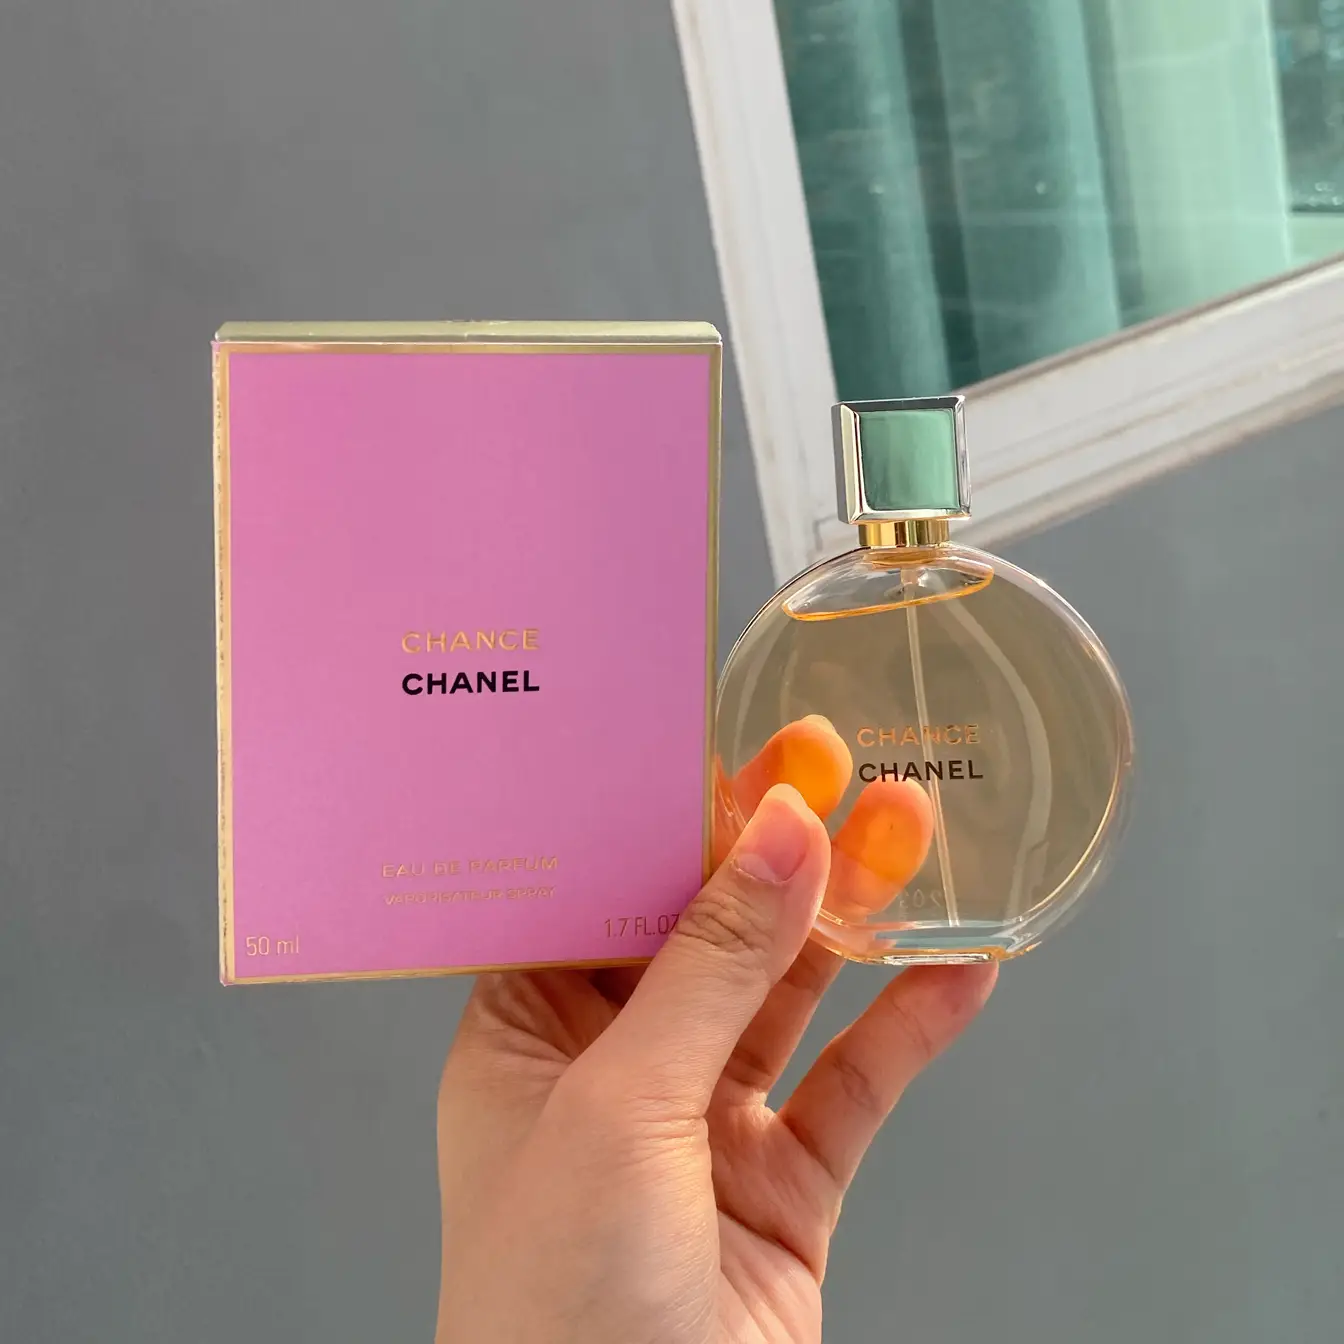 My First Chanel Perfume, Gallery posted by Agnes Goh